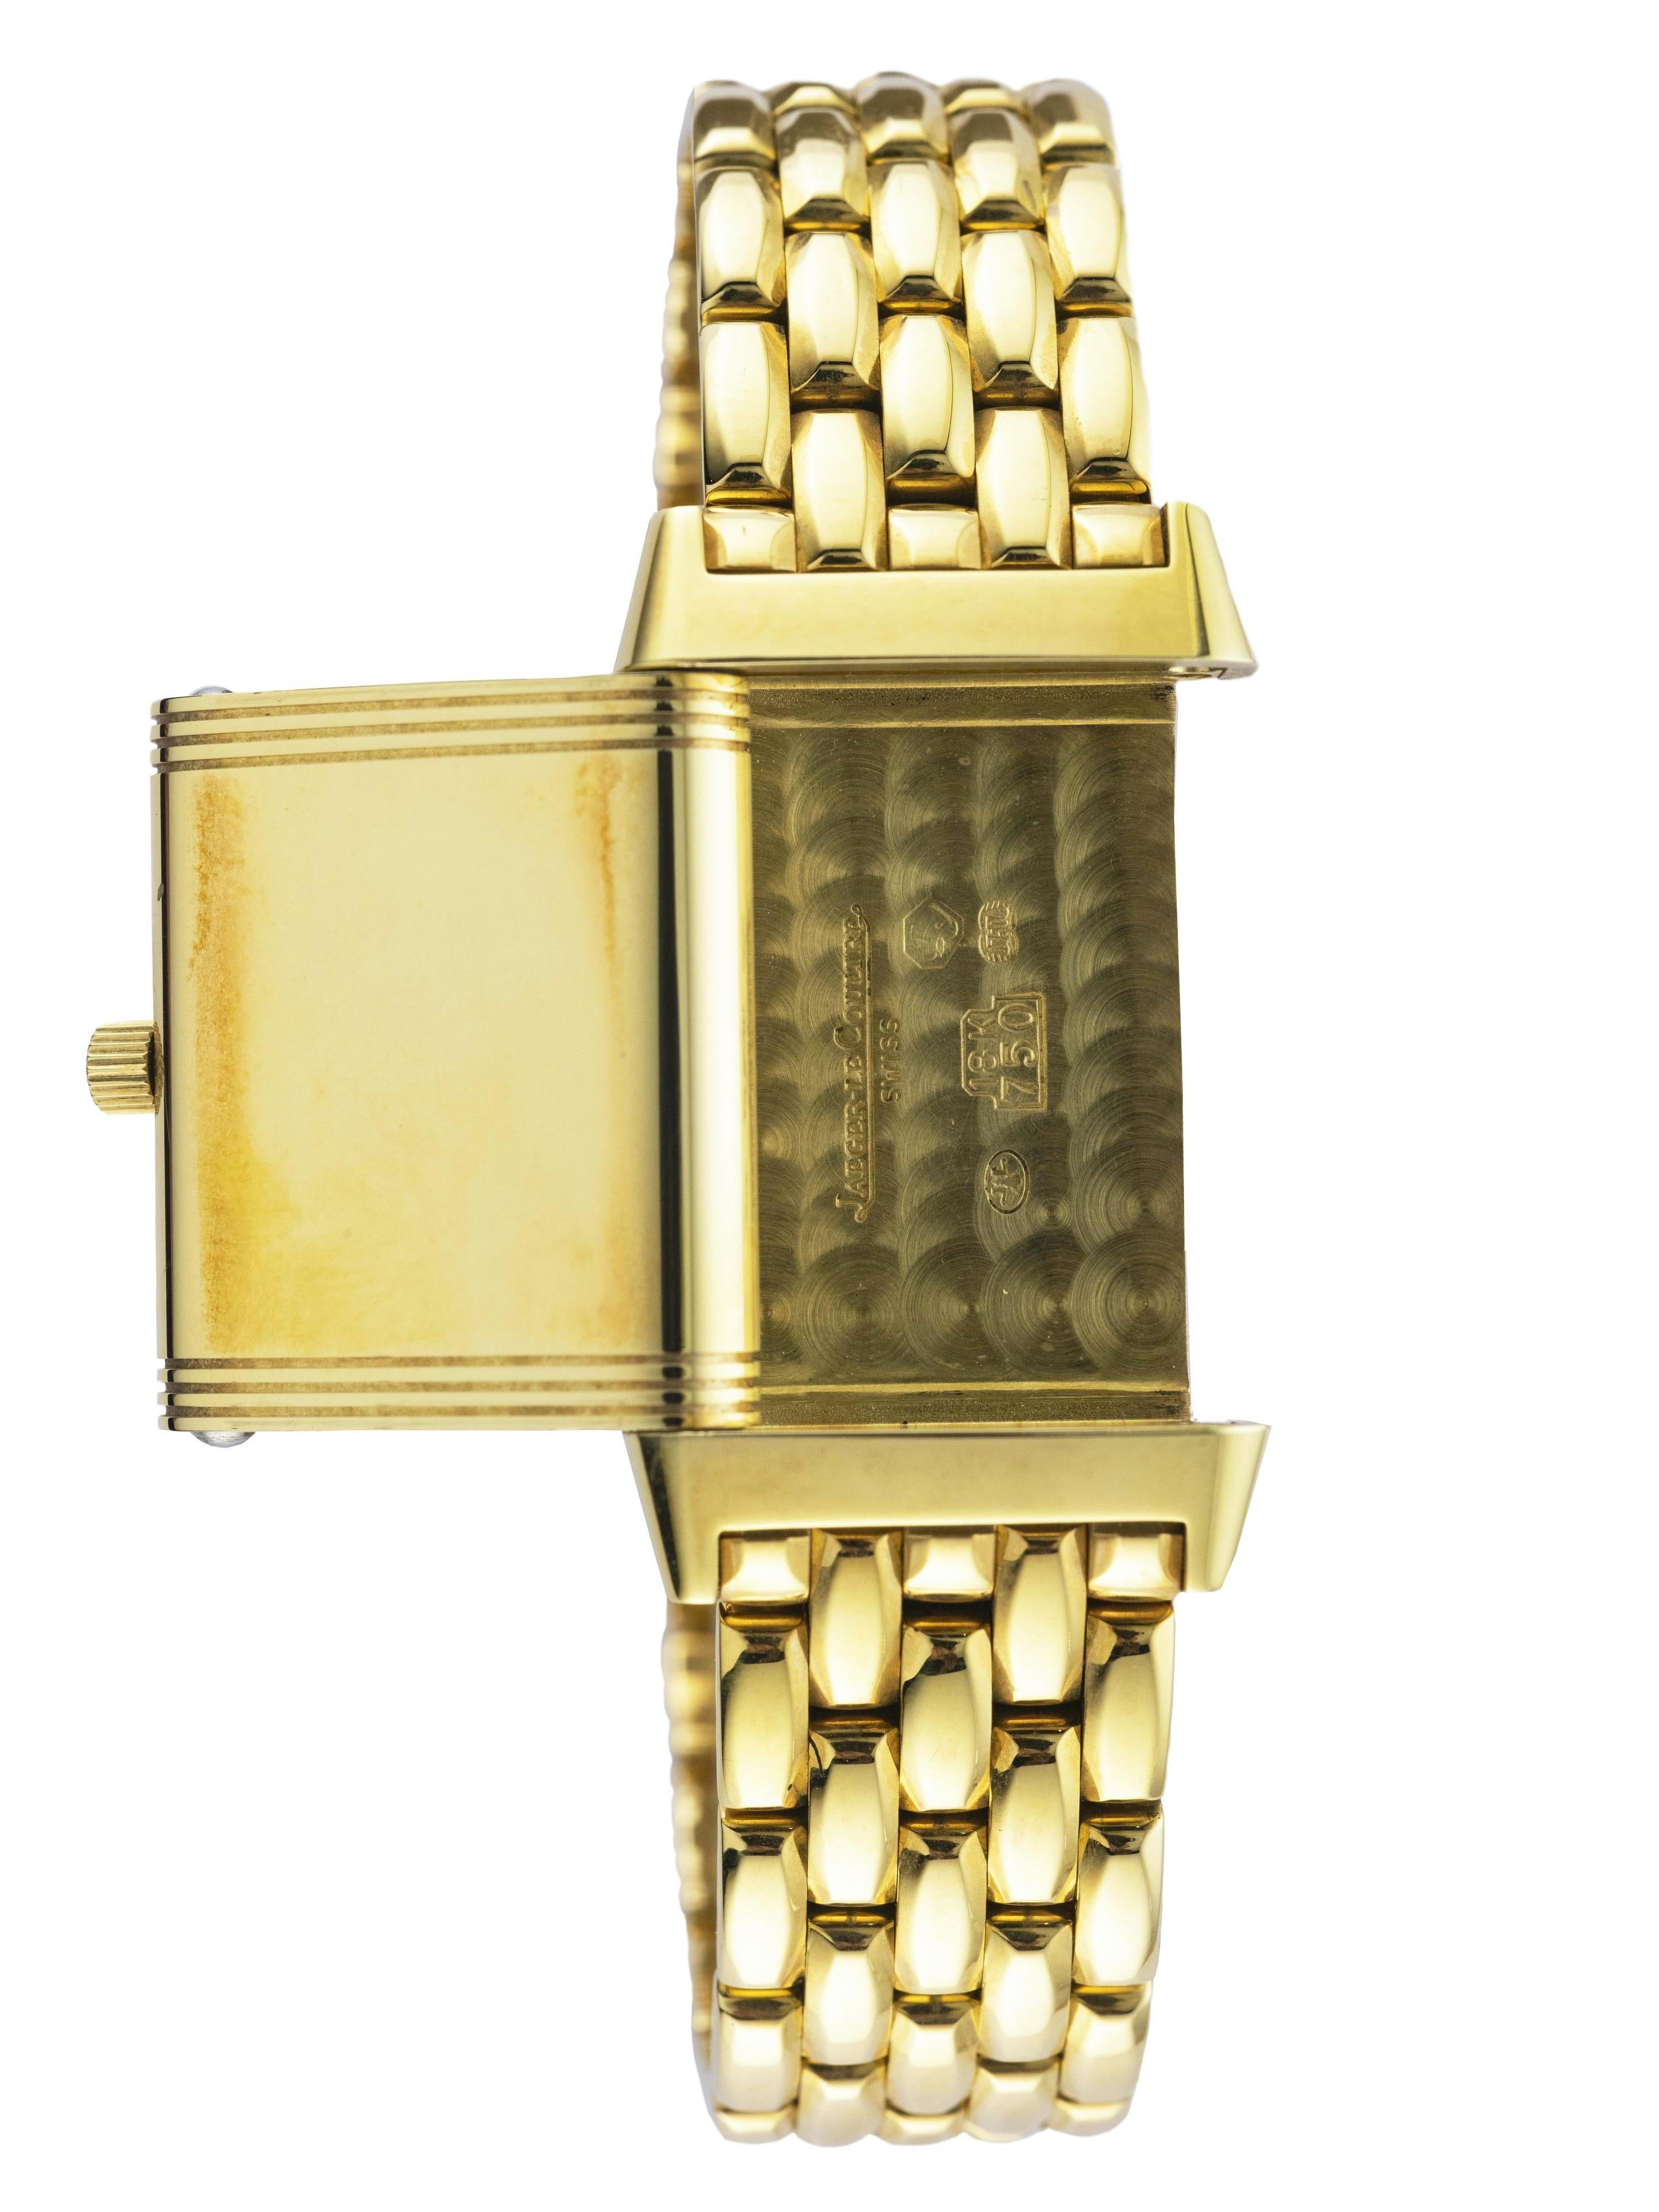 This yellow gold Reverso Watch has an argentè dial with blued steel hands.
A yellow gold bracelet is accompanied by a double deployant clasp, also in yellow gold.
The piece is fitted with sapphire glass and a manual winding movement.
The watch is a